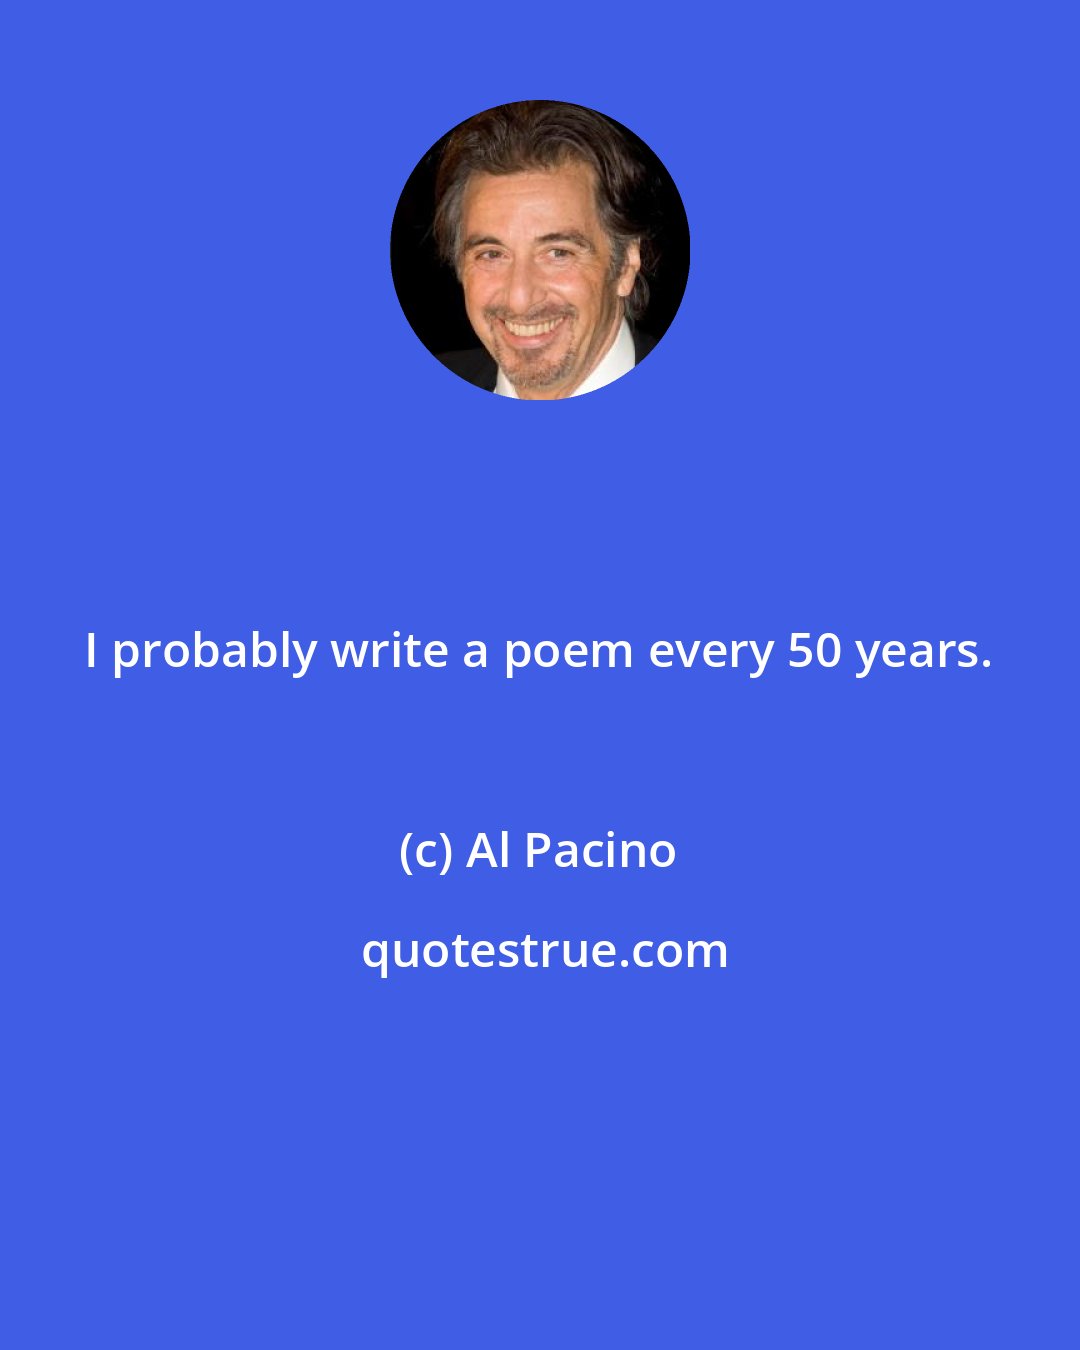 Al Pacino: I probably write a poem every 50 years.